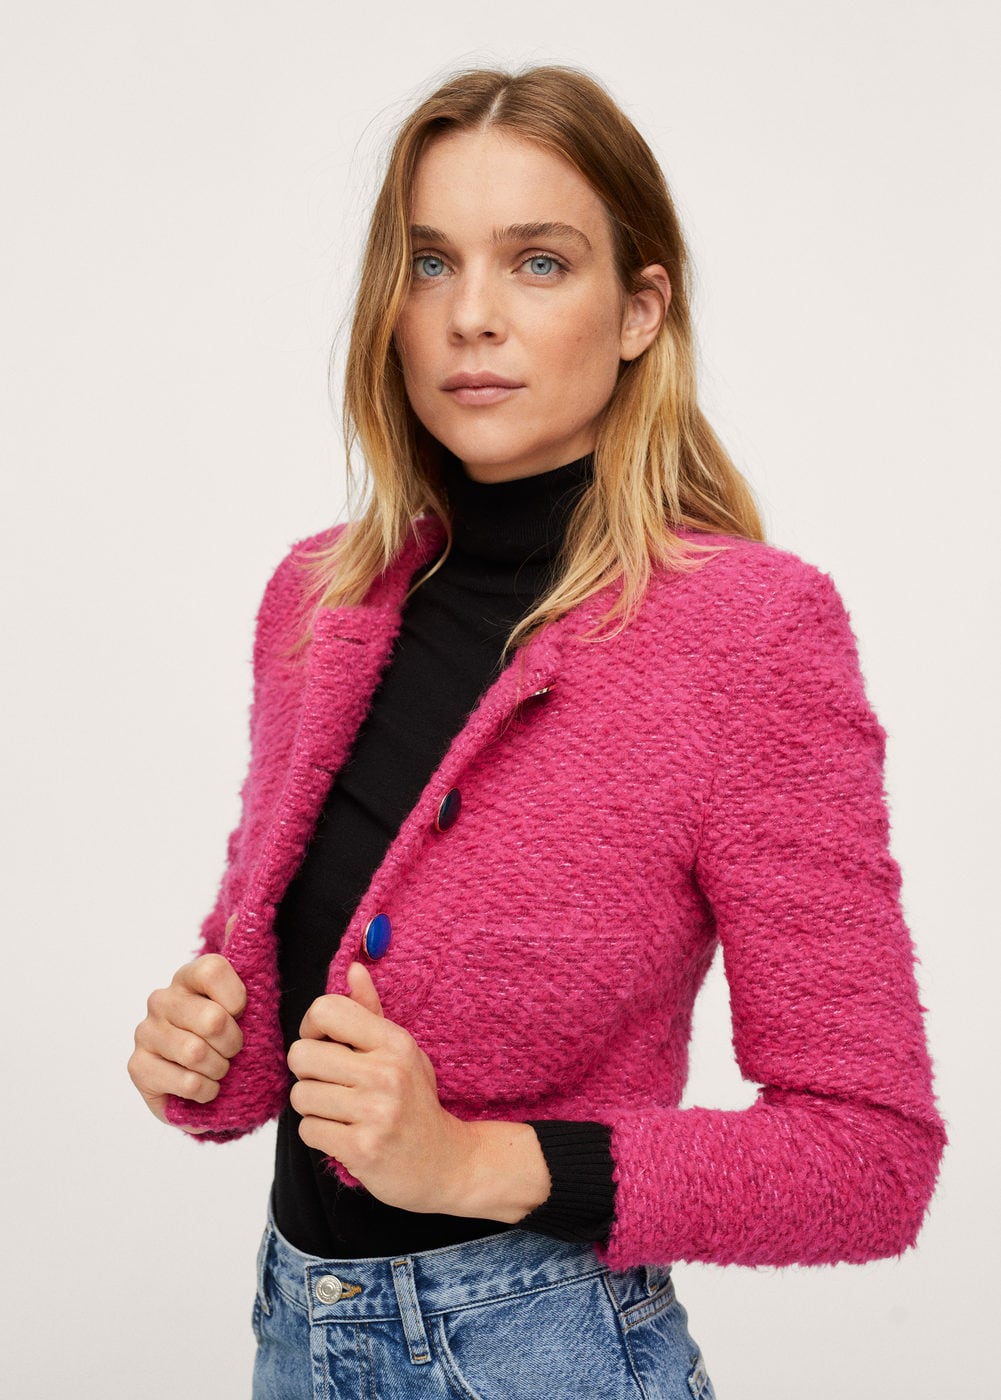 The 28 Best Tweed Jackets and Blazers for Women | Who What Wear